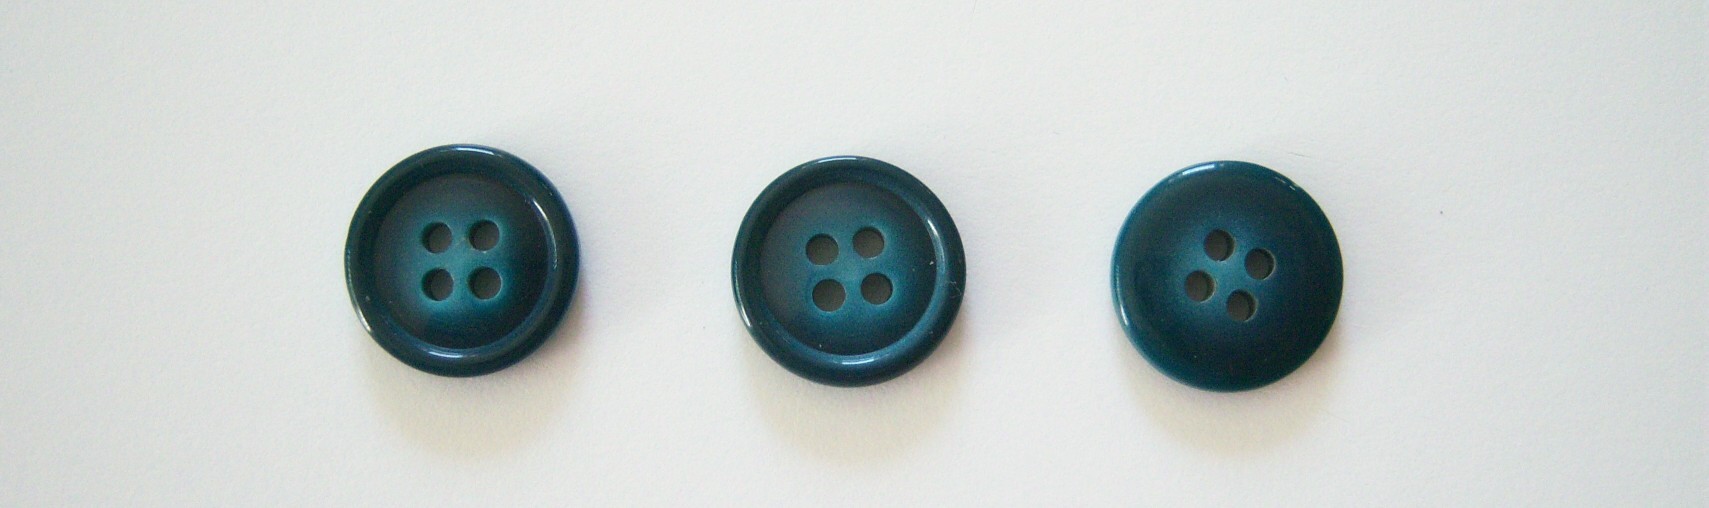 Teal/Aqua Marbled 11/16" Poly 4 Hole Button